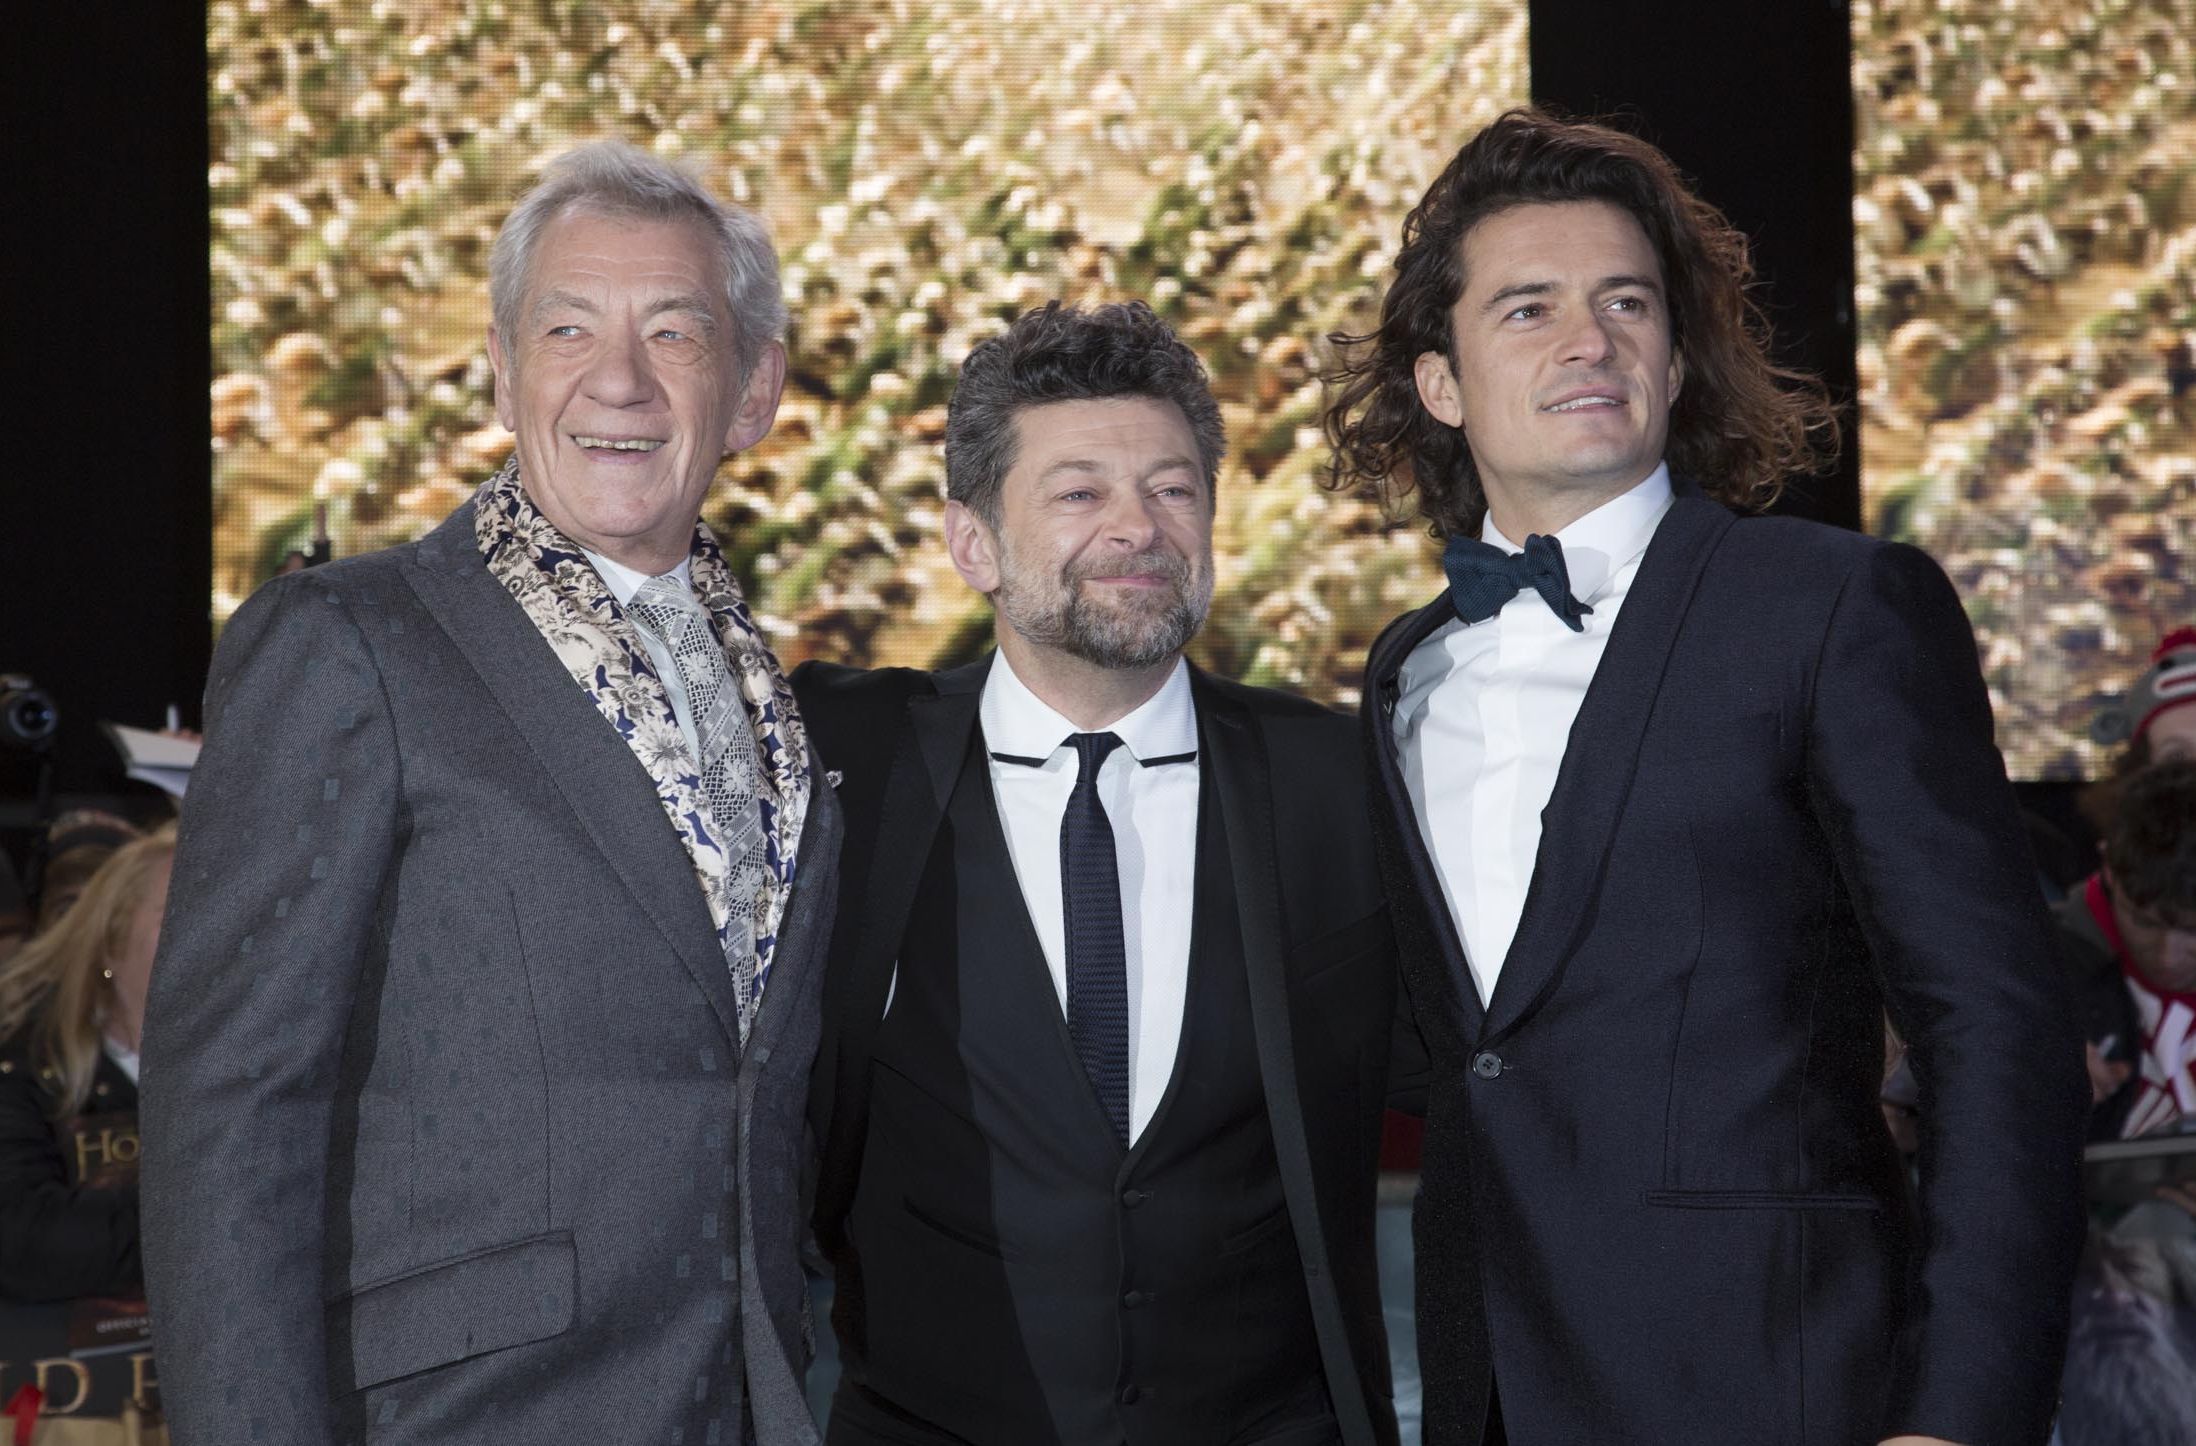 Ian McKellen, Andy Serkis and Orlando Bloom at The Hobbit: The Battle of the Five Armies